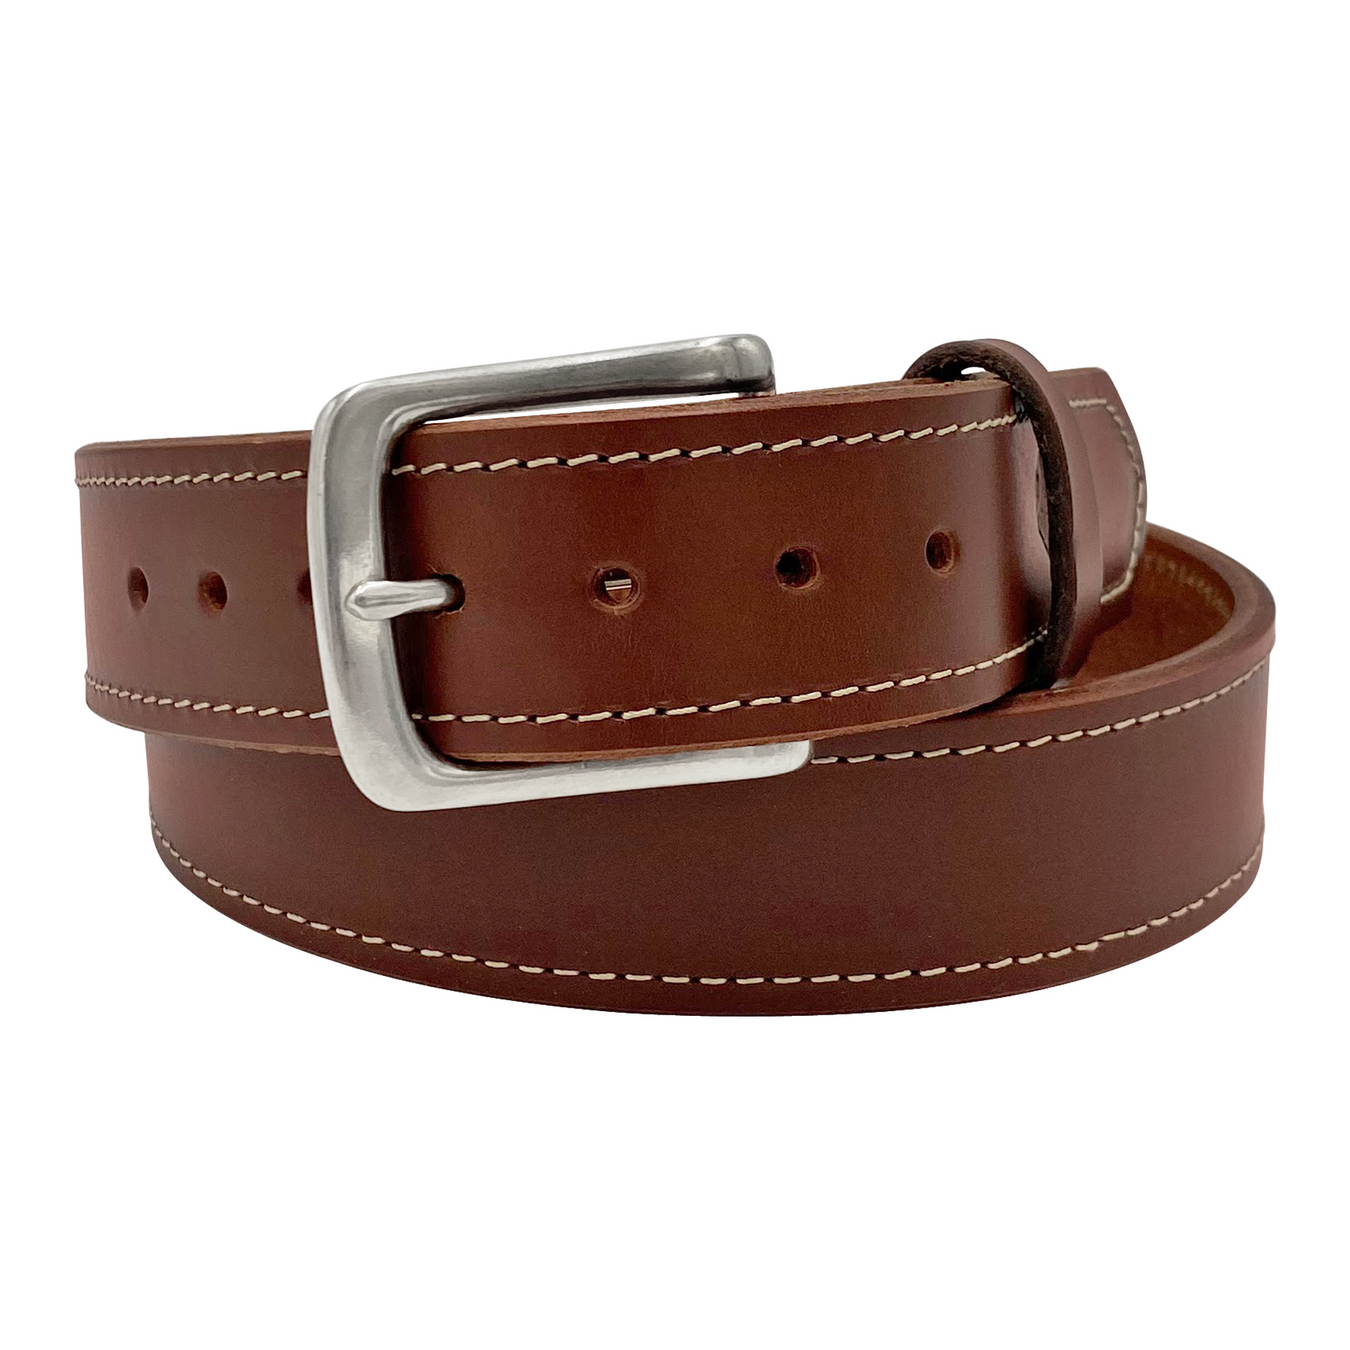 Leather Gun Belts for Concealed Carry